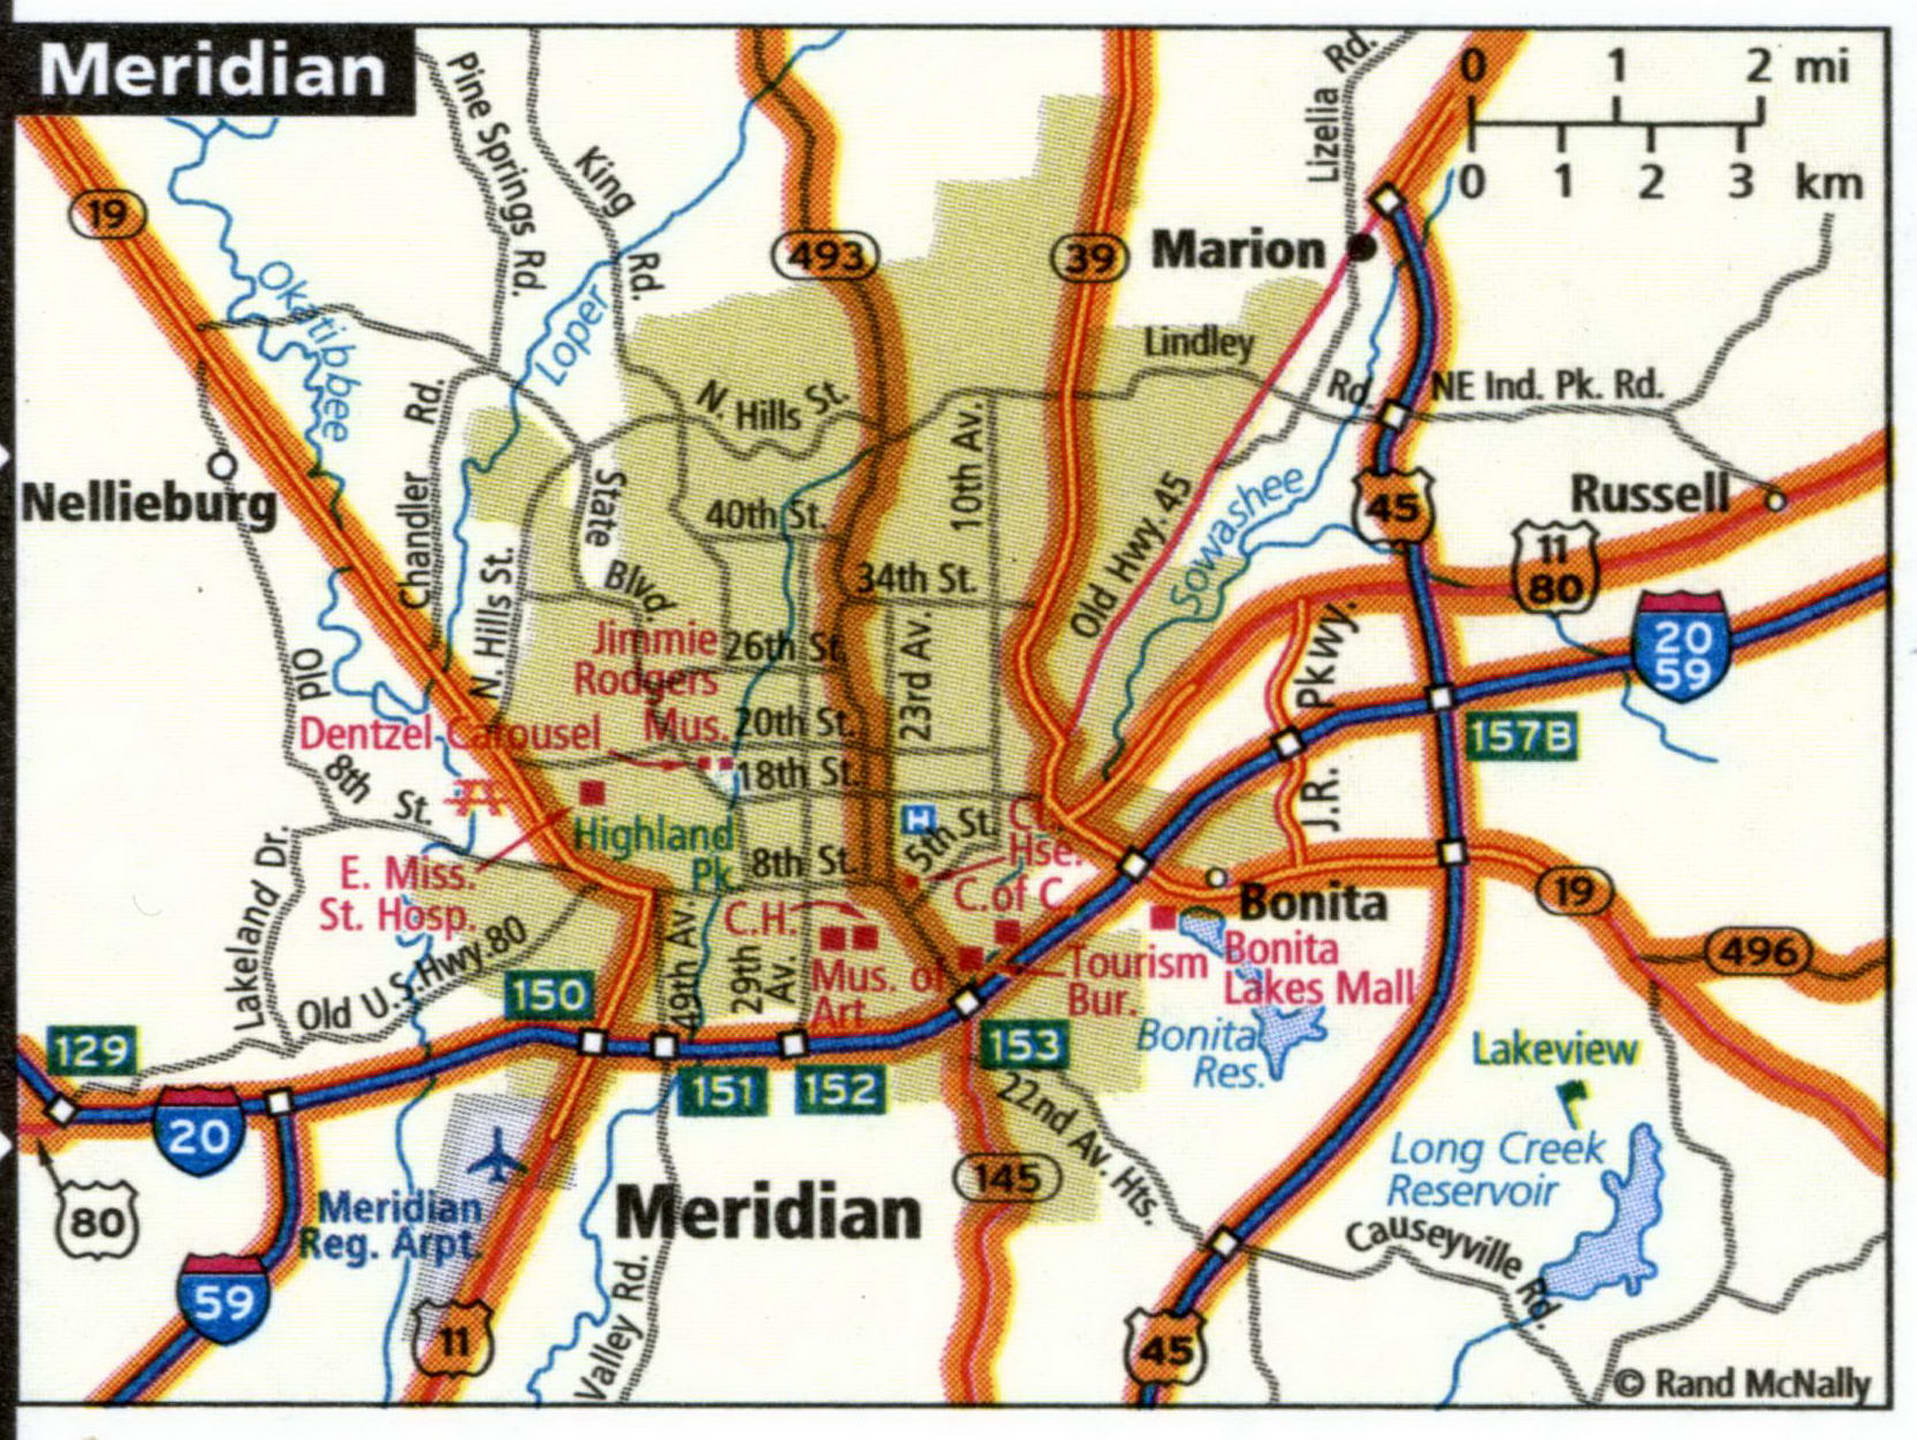 Meridian map for truckers